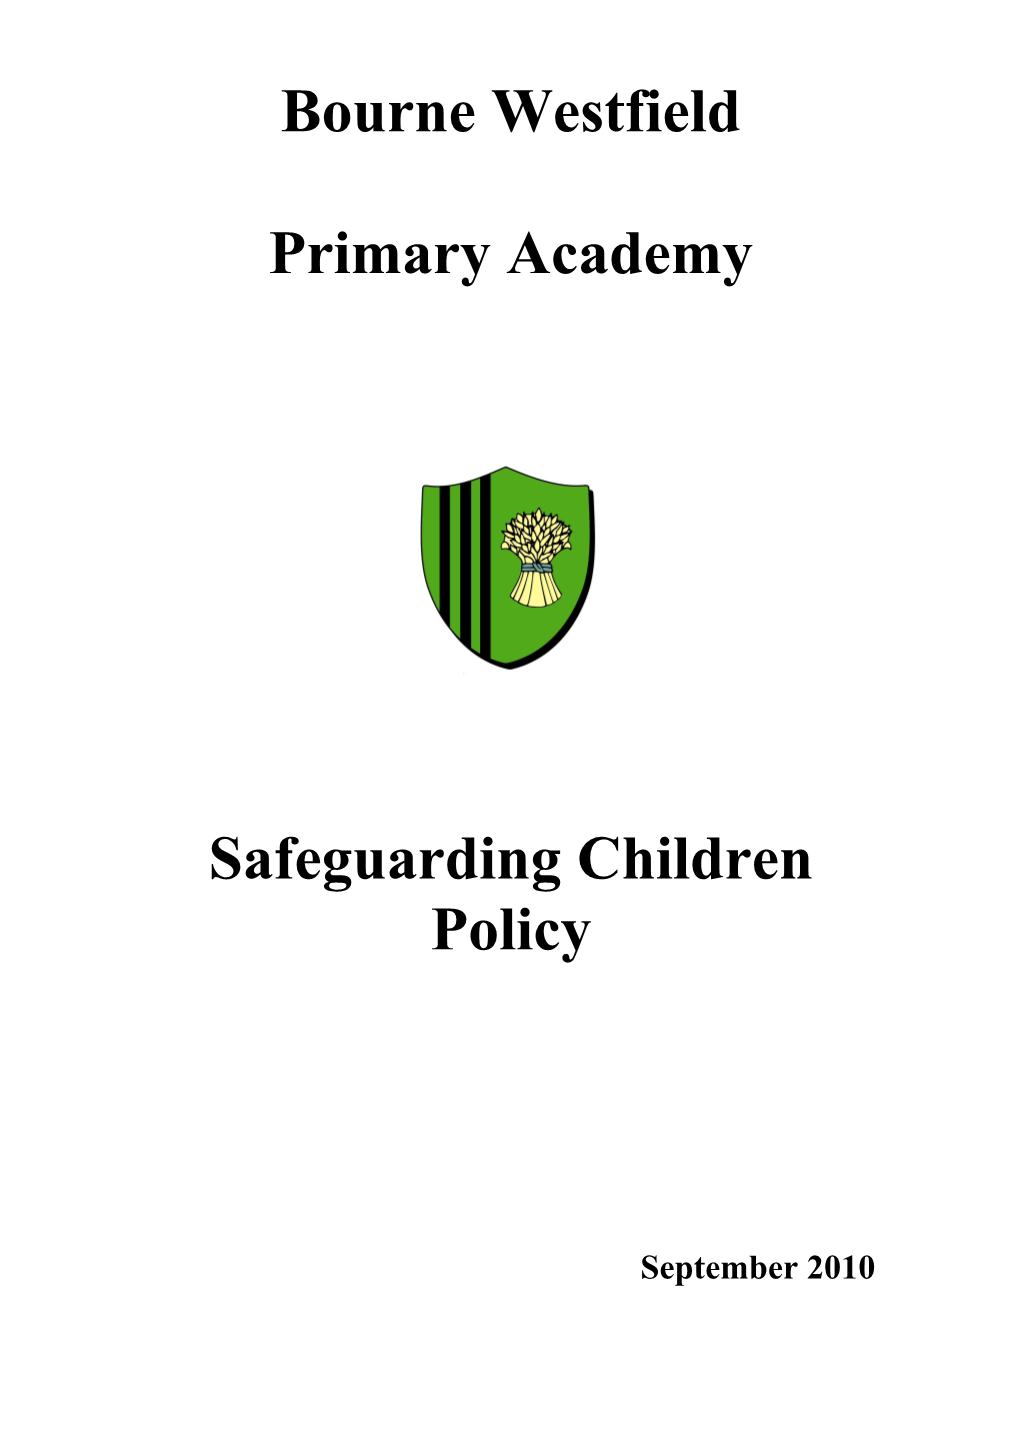 Safeguarding Children and Young People Policy for Bourne Westfield Primary School